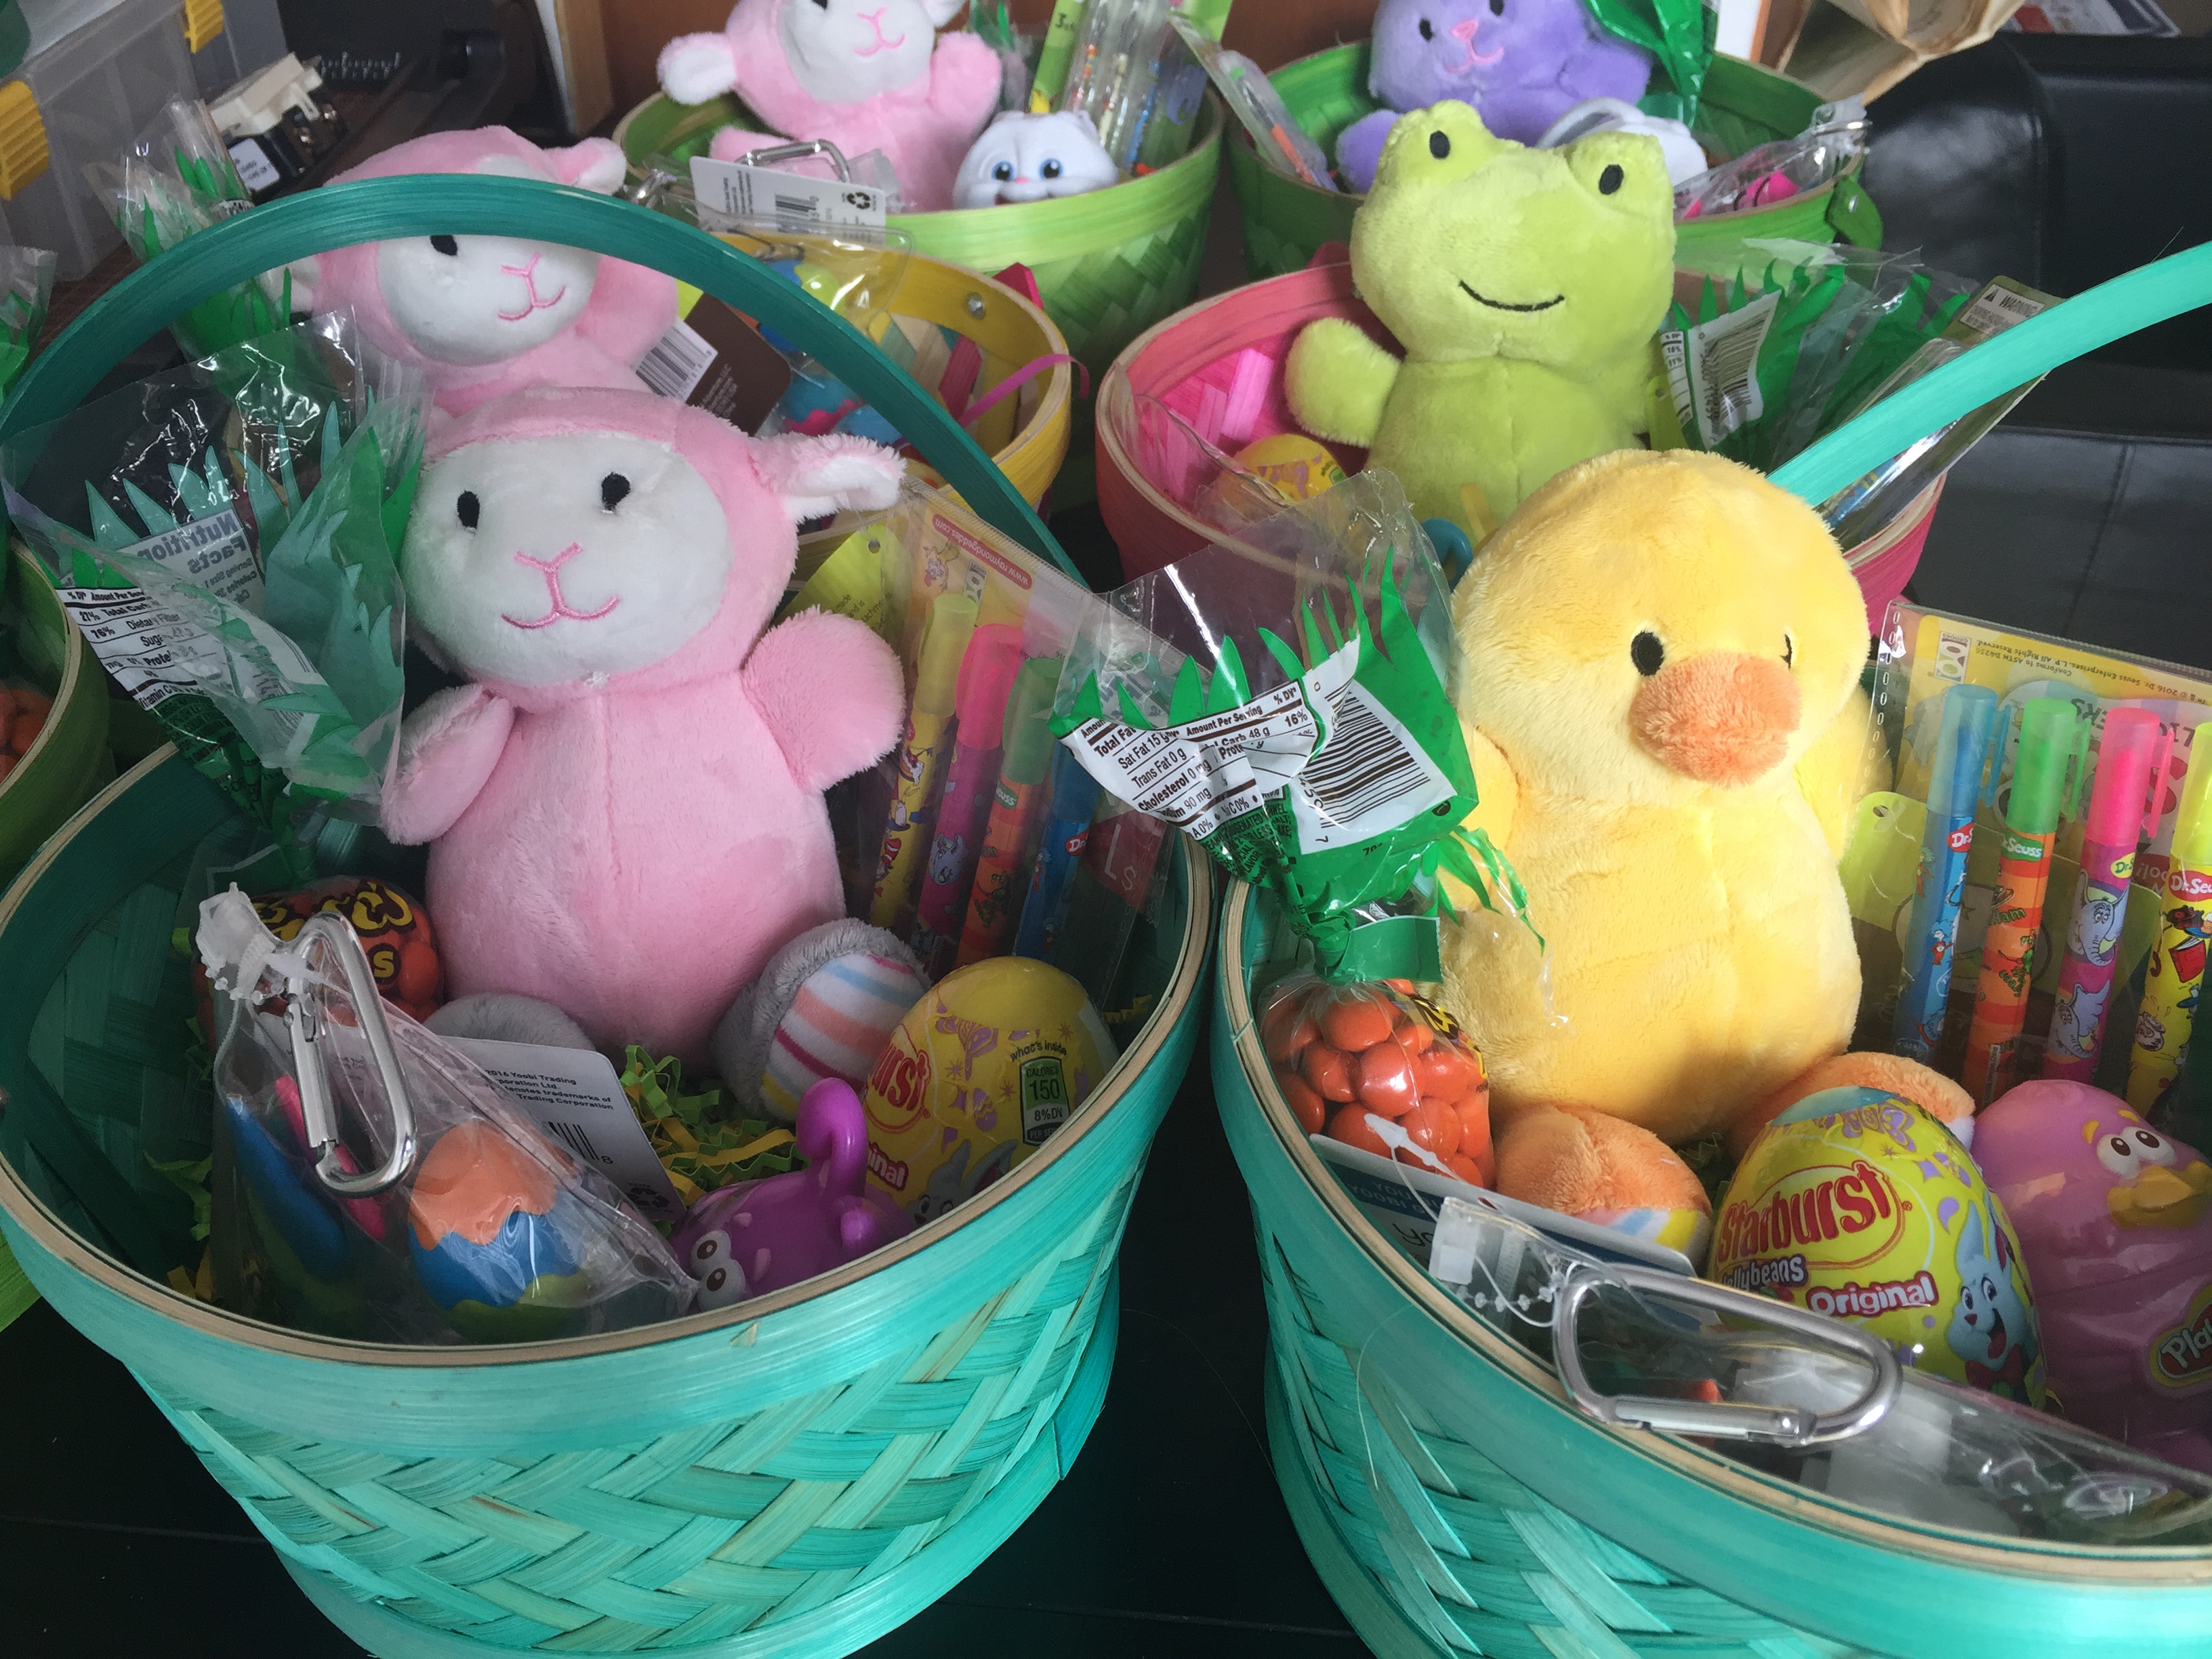 Hop on Angel Island Ferry for Easter Egg Hunts with fun-filled prizes.